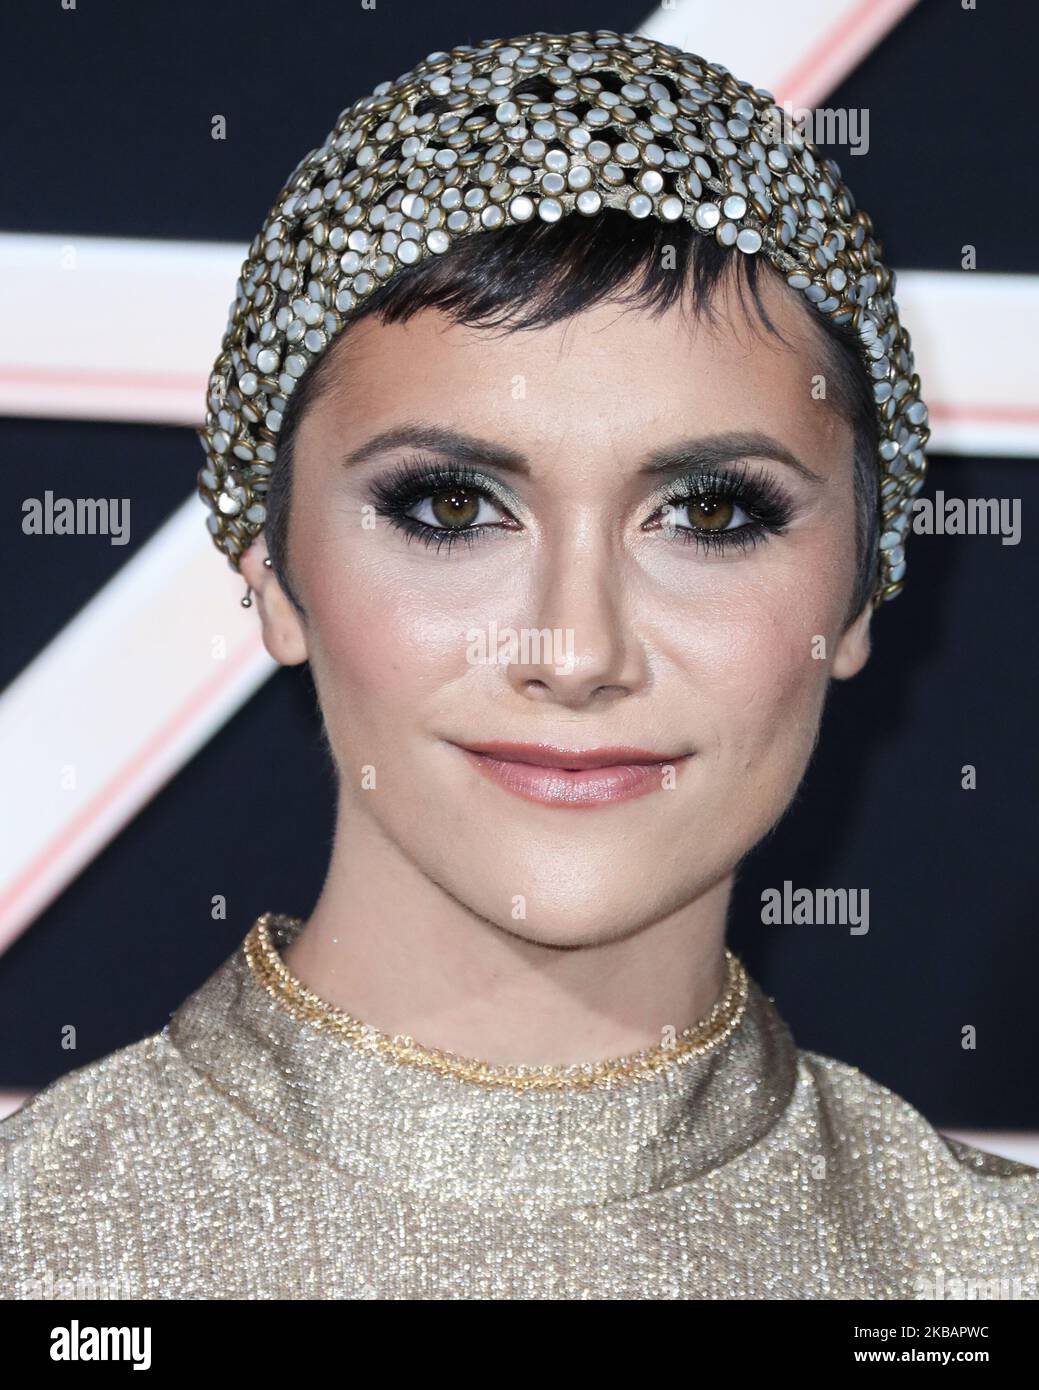 WESTWOOD, LOS ANGELES, CALIFORNIA, USA - NOVEMBER 11: Alyson Stoner arrives at the Los Angeles Premiere Of Columbia Pictures' 'Charlie's Angels' held at the Westwood Regency Theater on November 11, 2019 in Westwood, Los Angeles, California, United States. (Photo by Xavier Collin/Image Press Agency/NurPhoto) Stock Photo